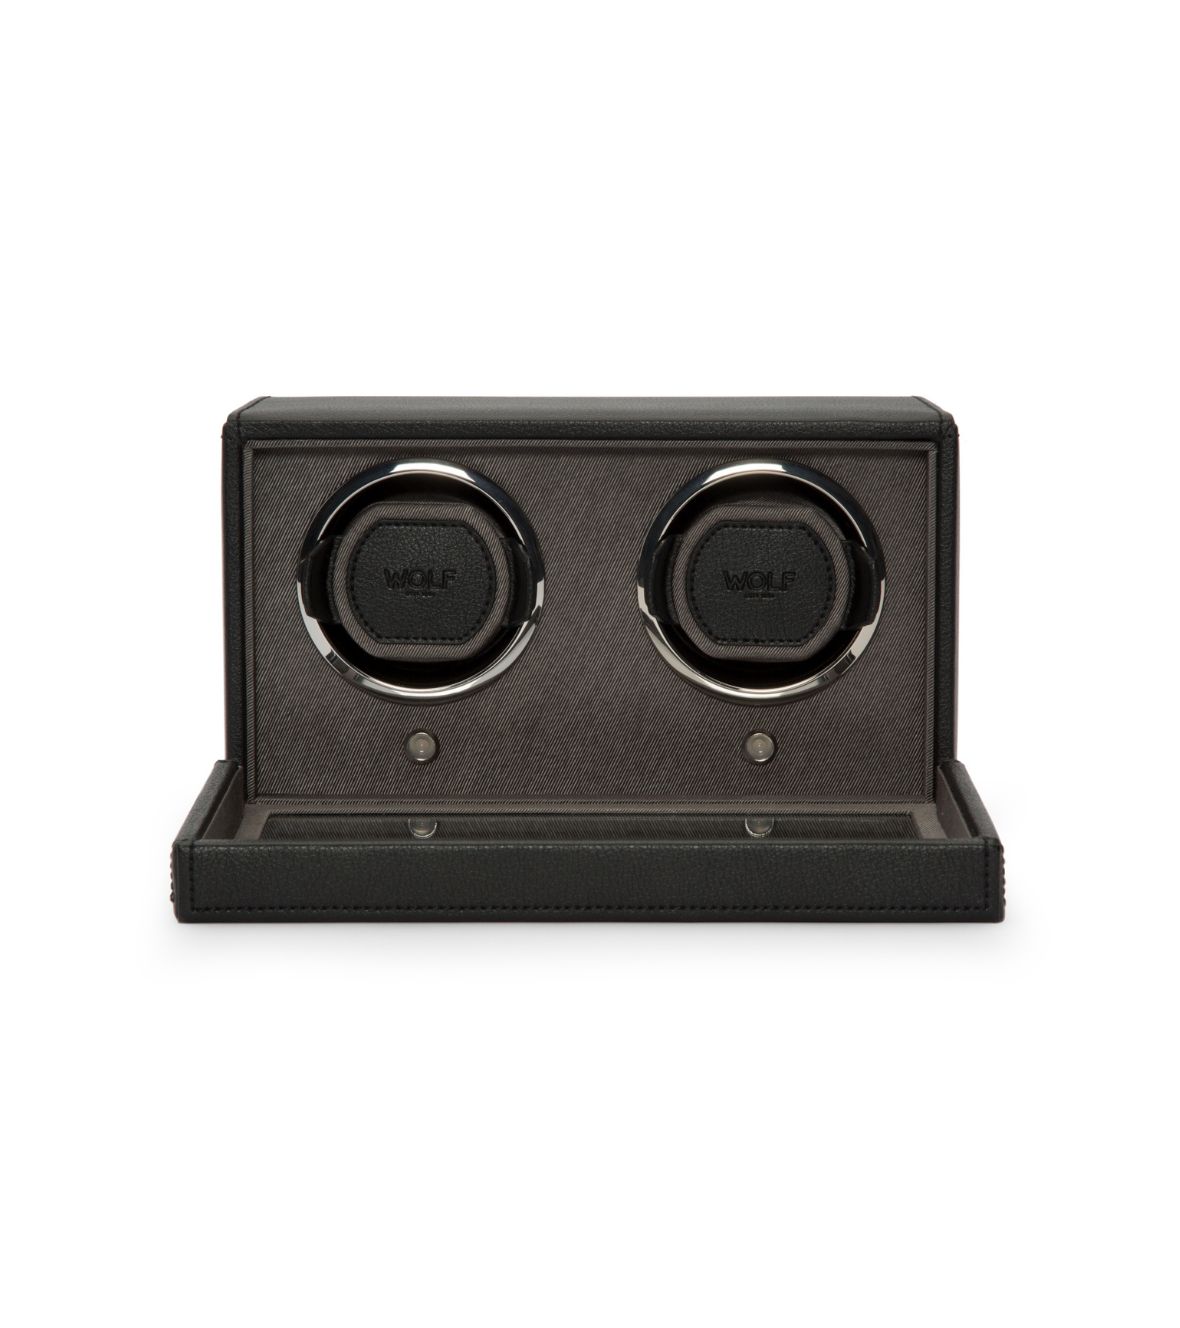 Cub Single Watch Winder With Cover 461203